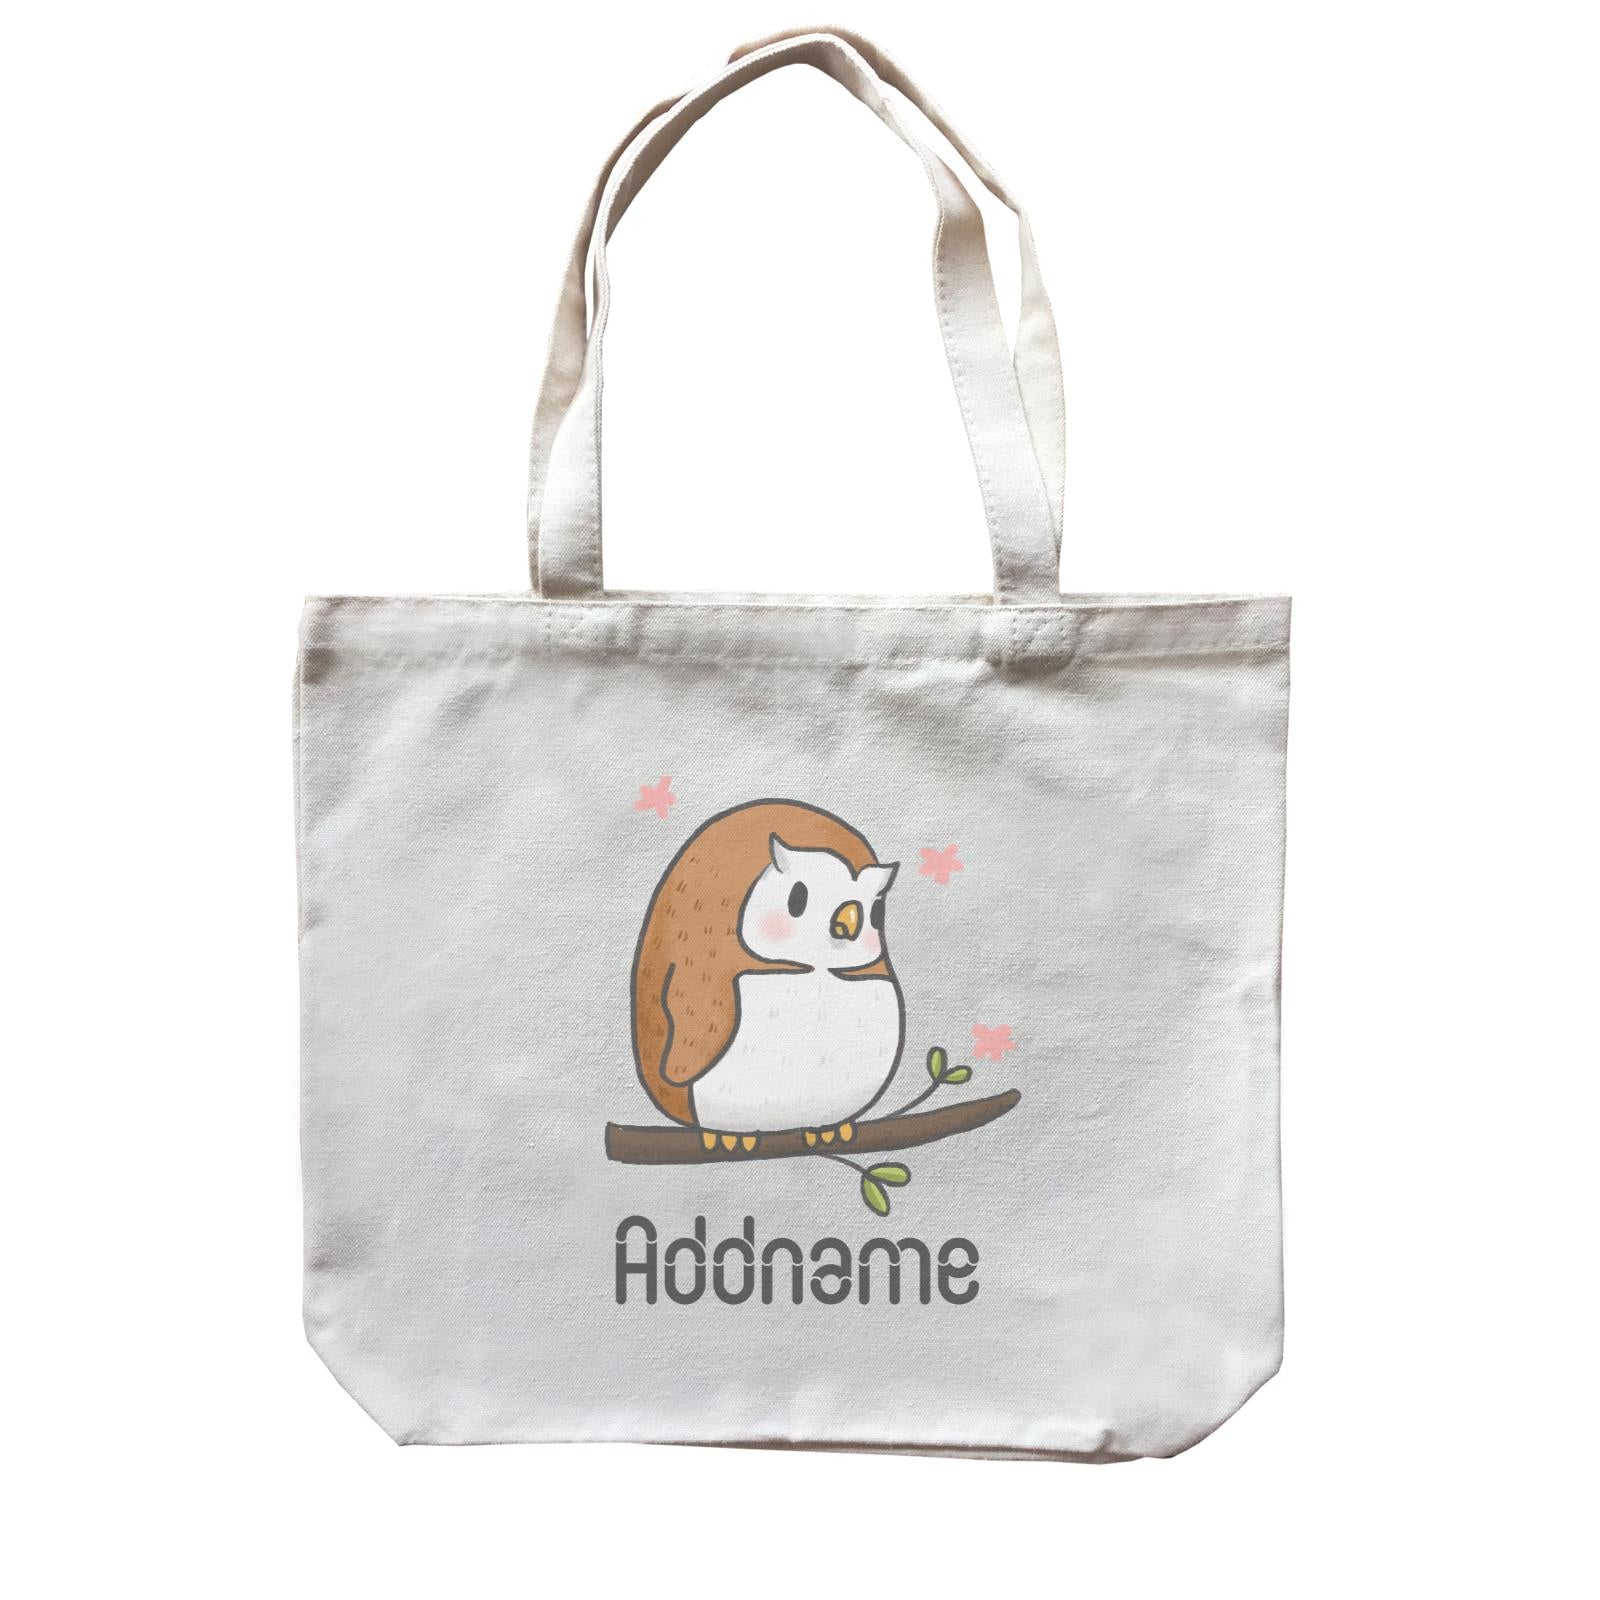 Cute Hand Drawn Style Owl Addname Canvas Bag